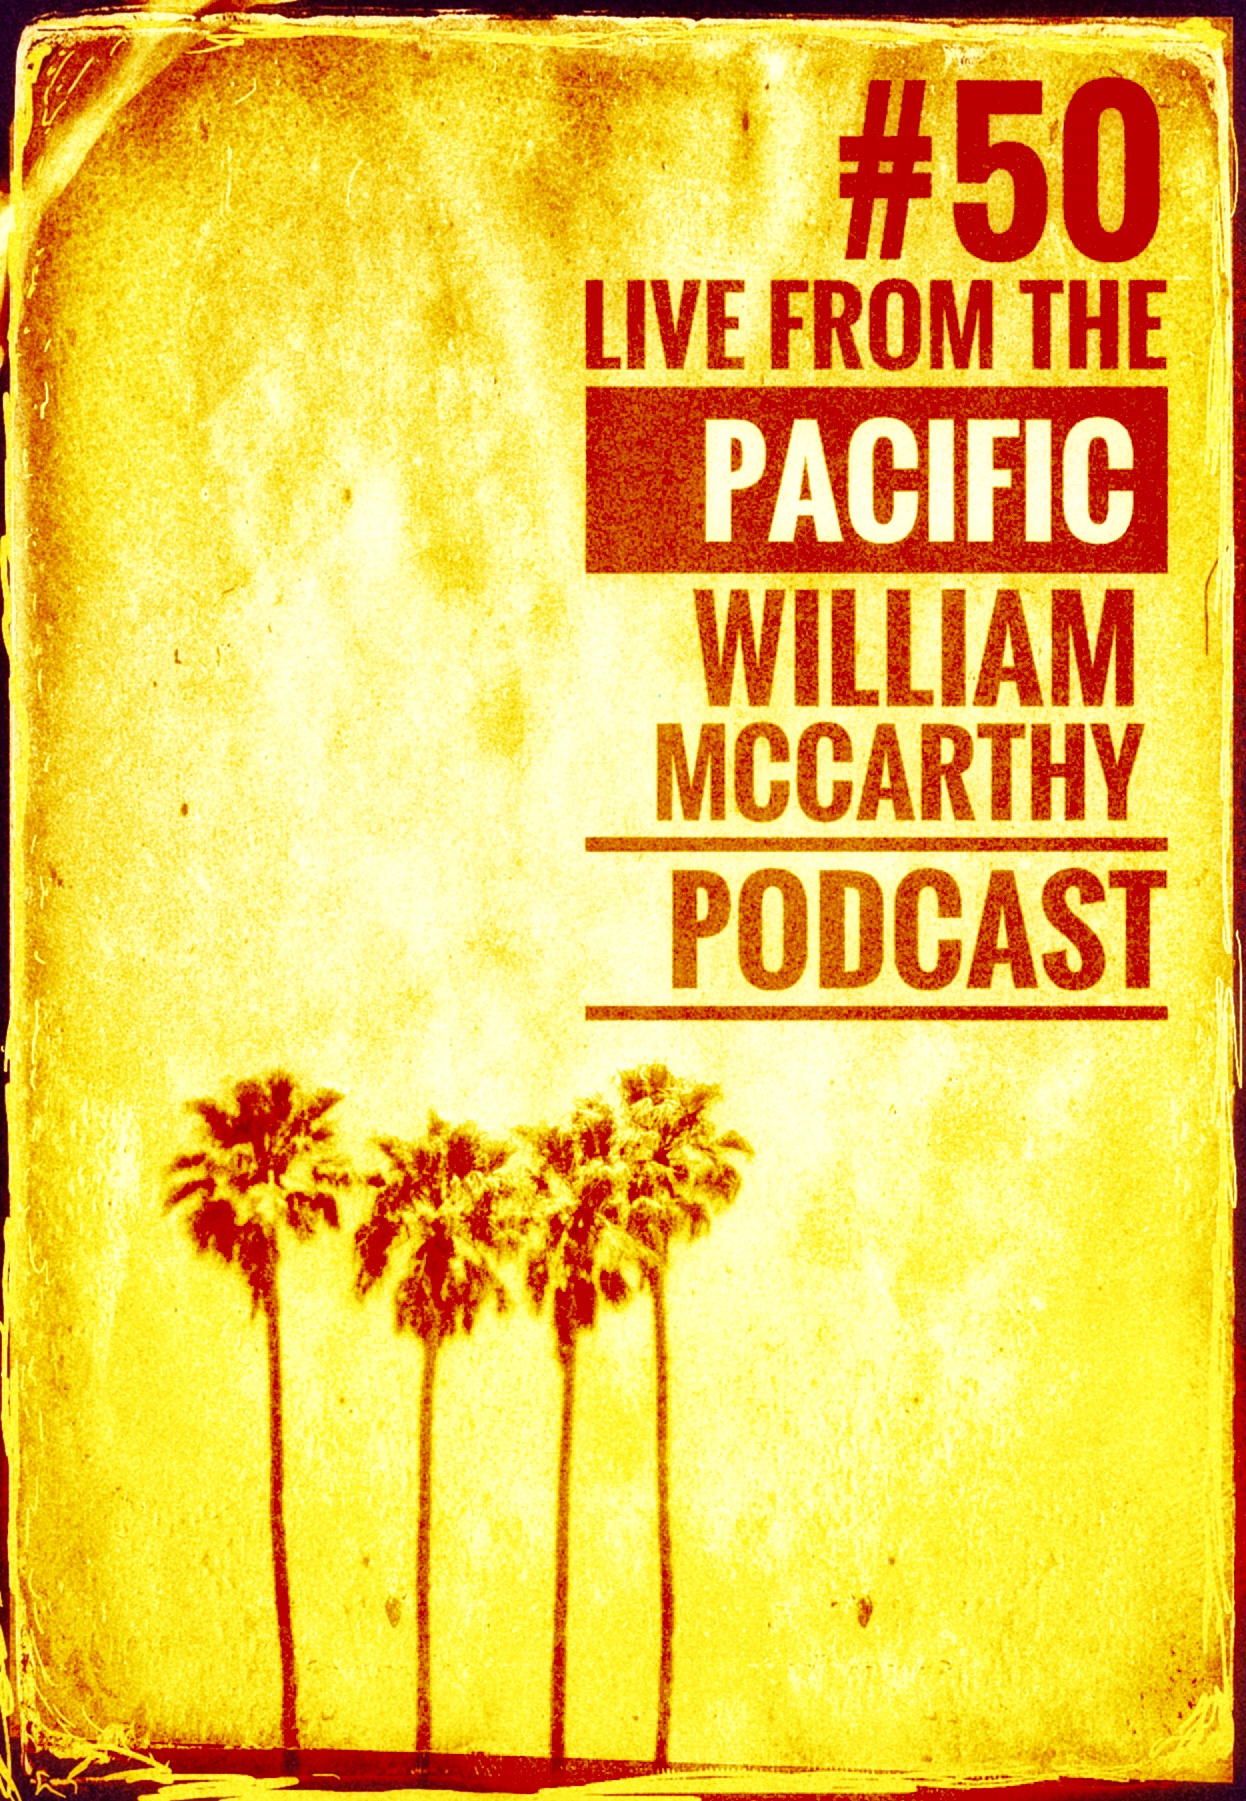 Celebrating my 50th Podcast episode we explore the Pacific ocean, Island of the blue dolphins, The Spanish missions of California, Rock ‘n’ roll and Punk, beatniks, west coast history and my upcoming Mexico journey